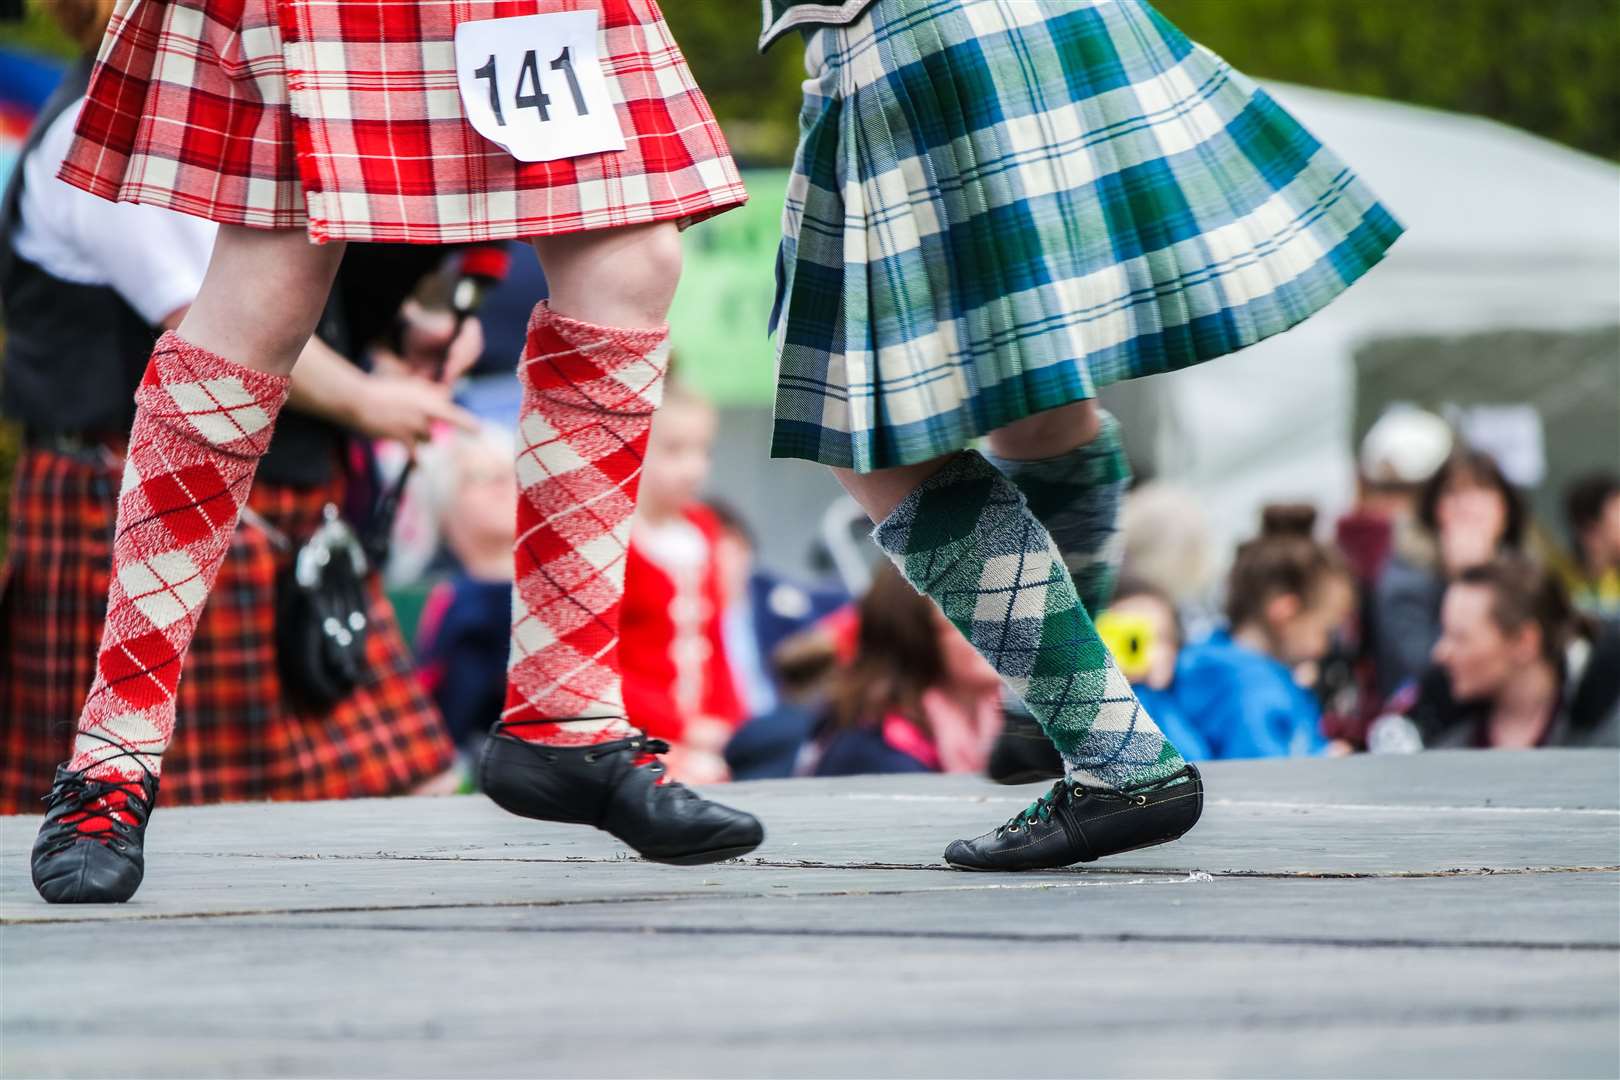 Helmsdale and District Highland Games takes place on Saturday, August 20.